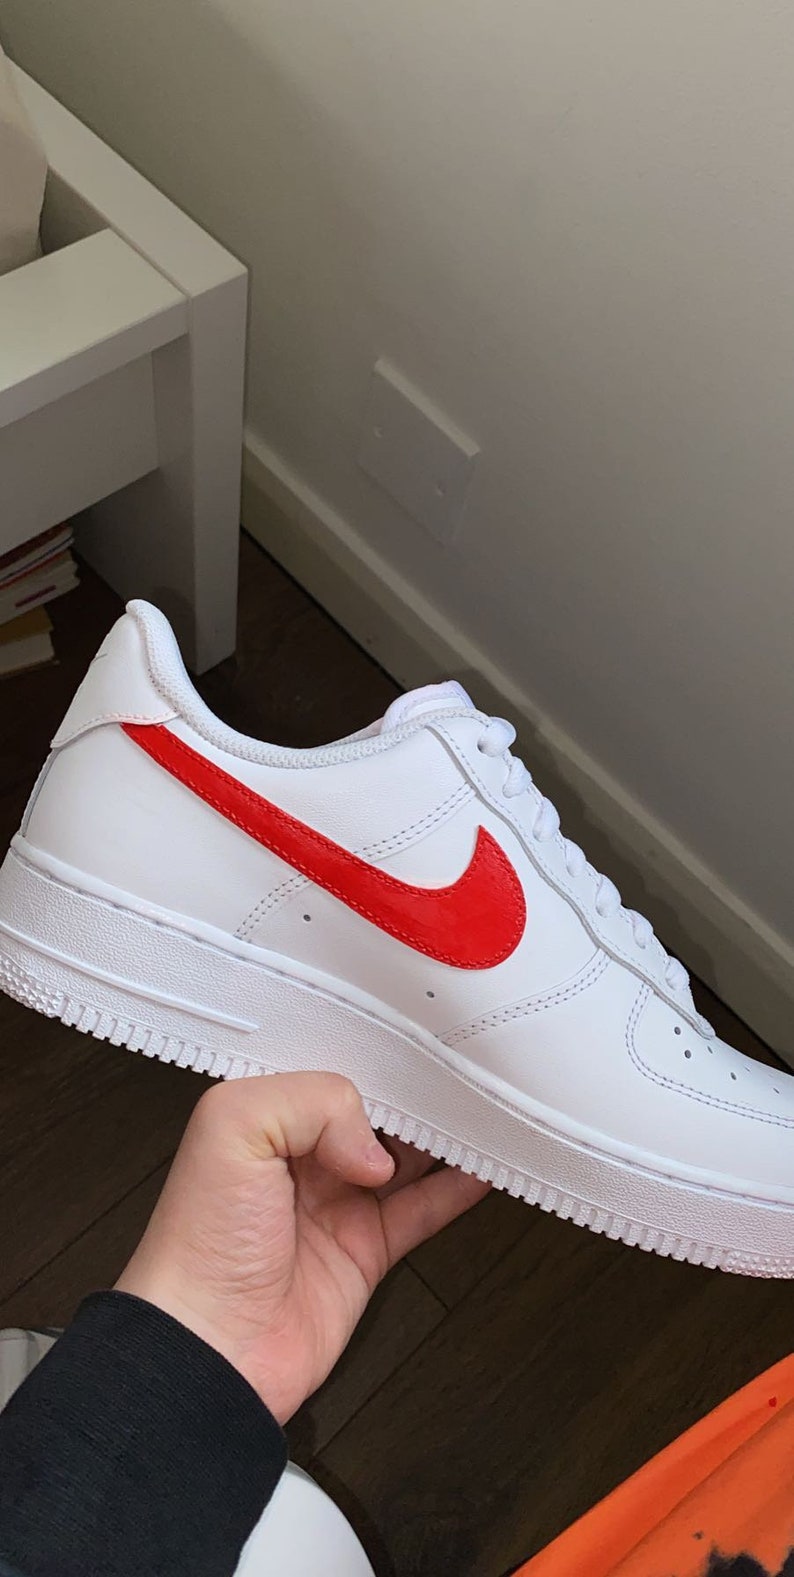 where can i buy air force 1s near me